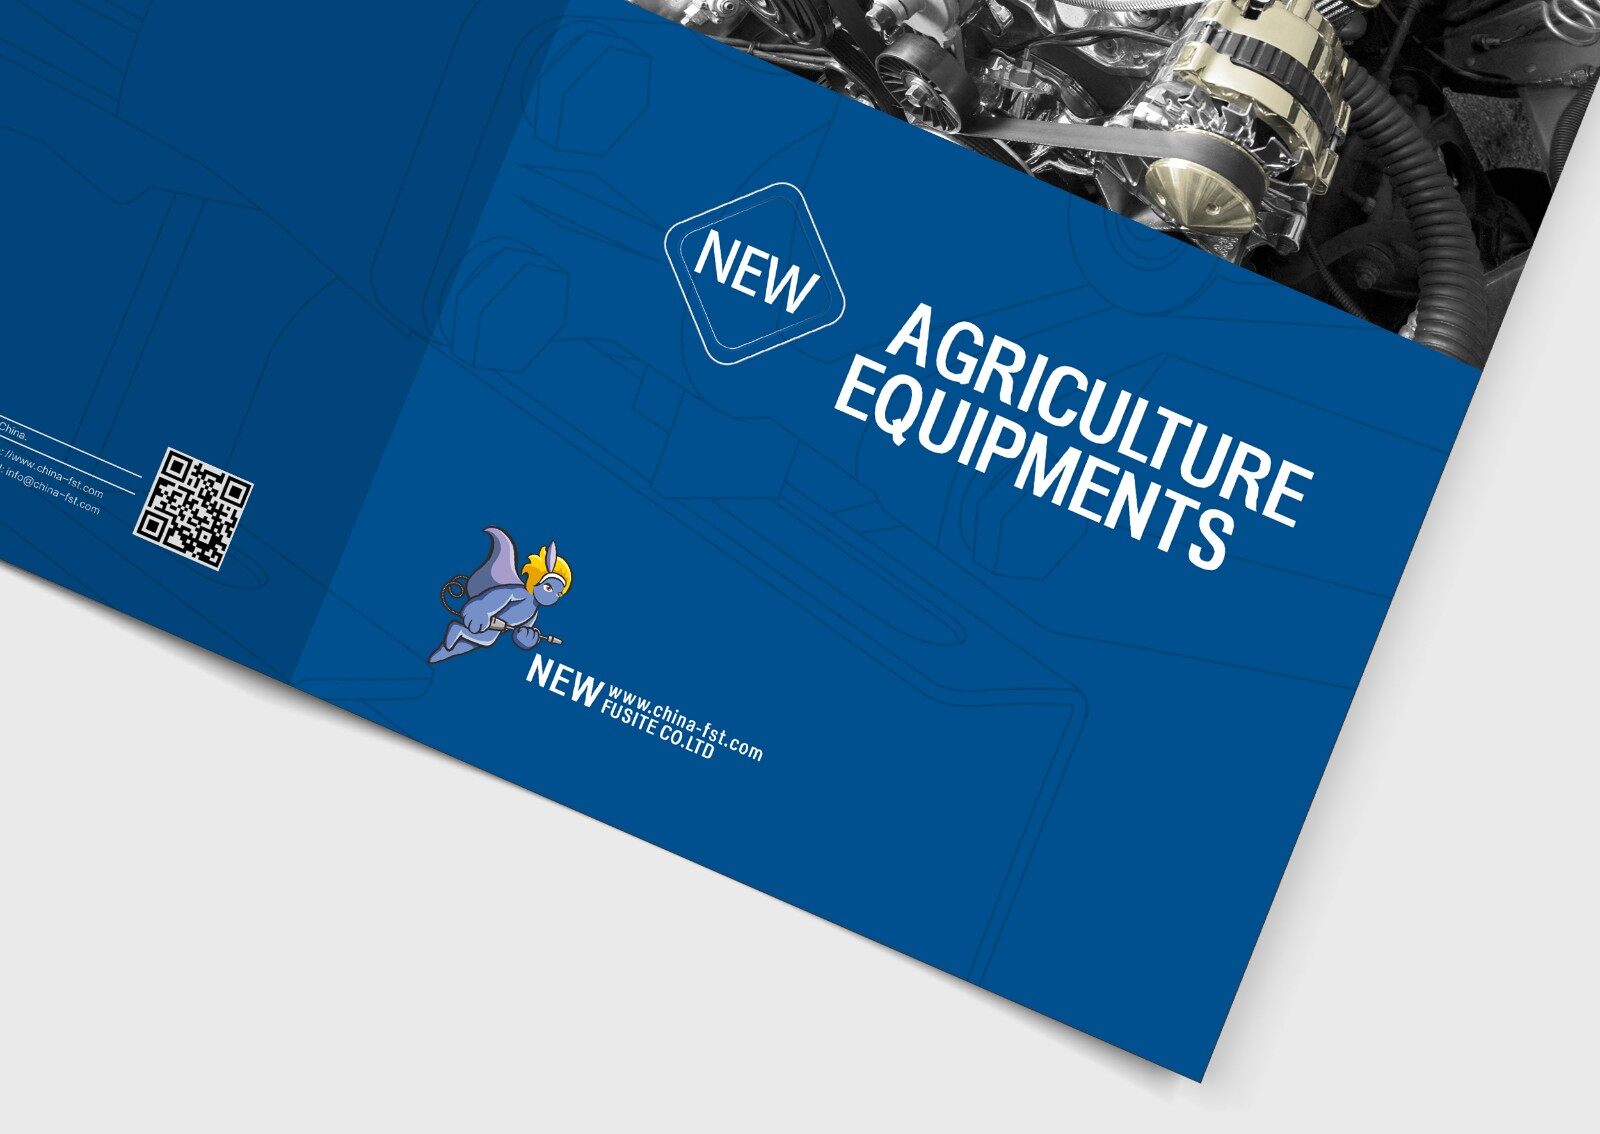 2019 AGRICULTURE EQUIPMENTS